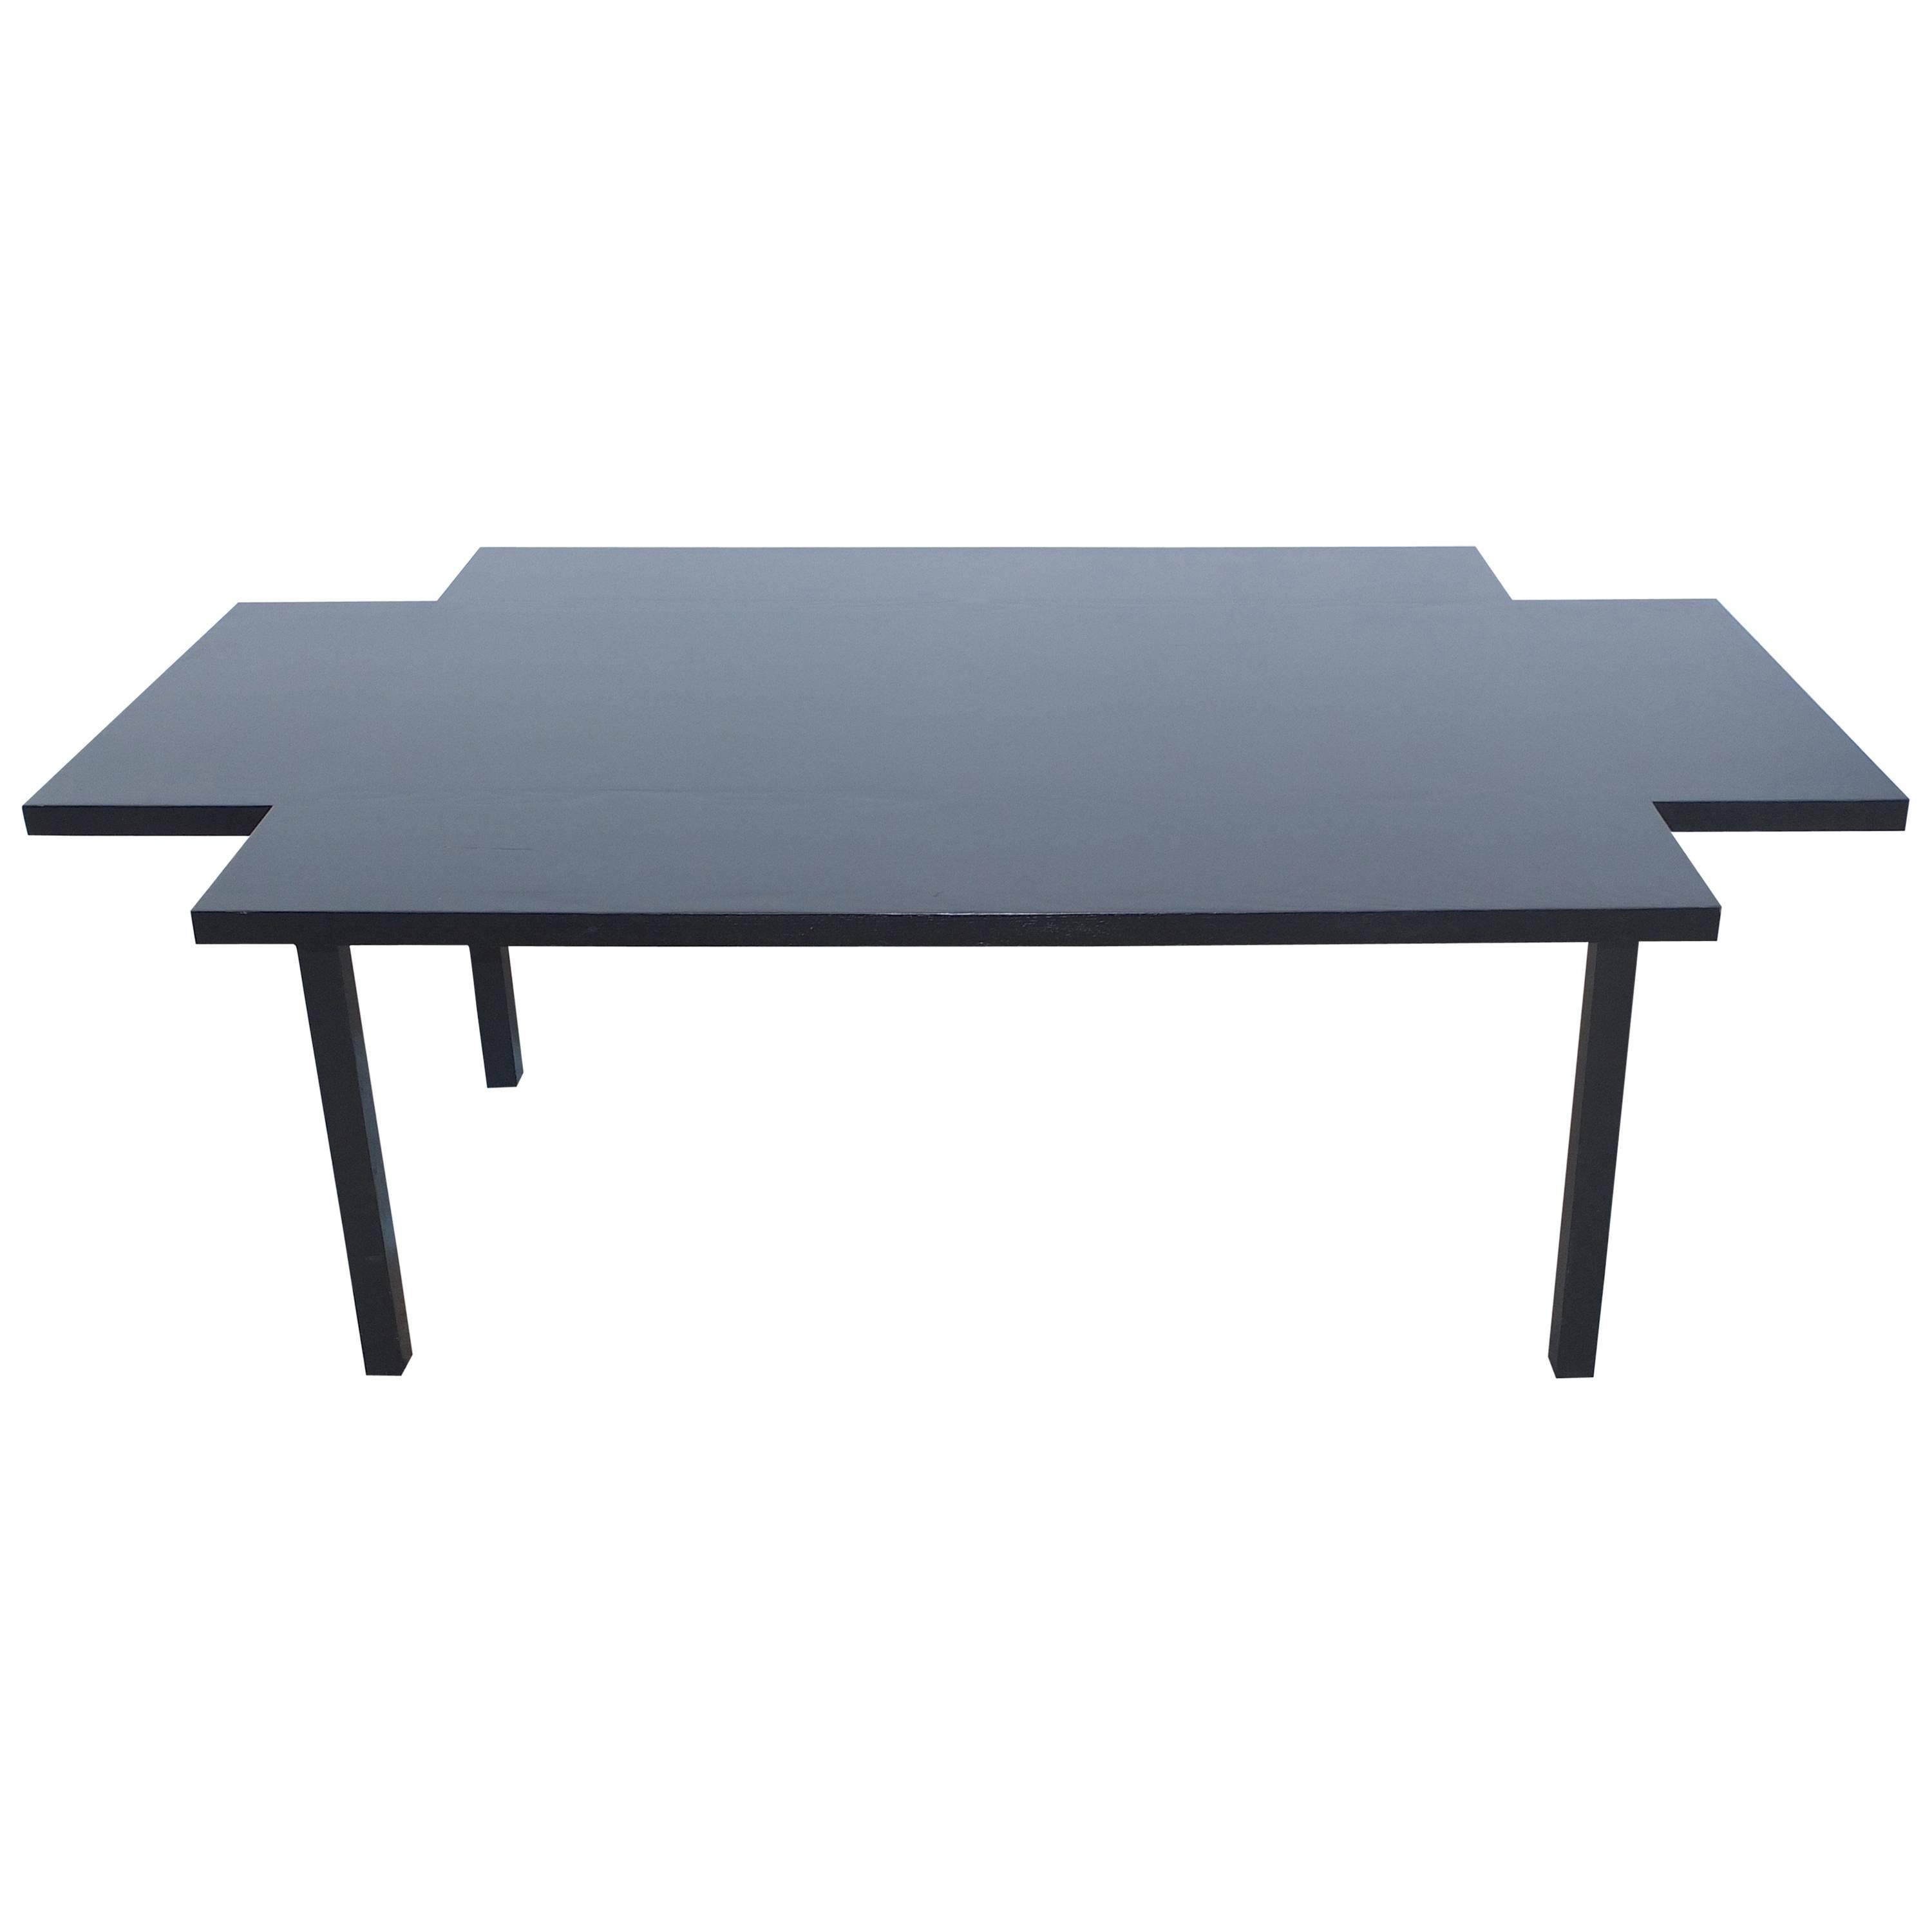 Grid Form Dining Table Attributed to Ward Bennett for Brickel Associates